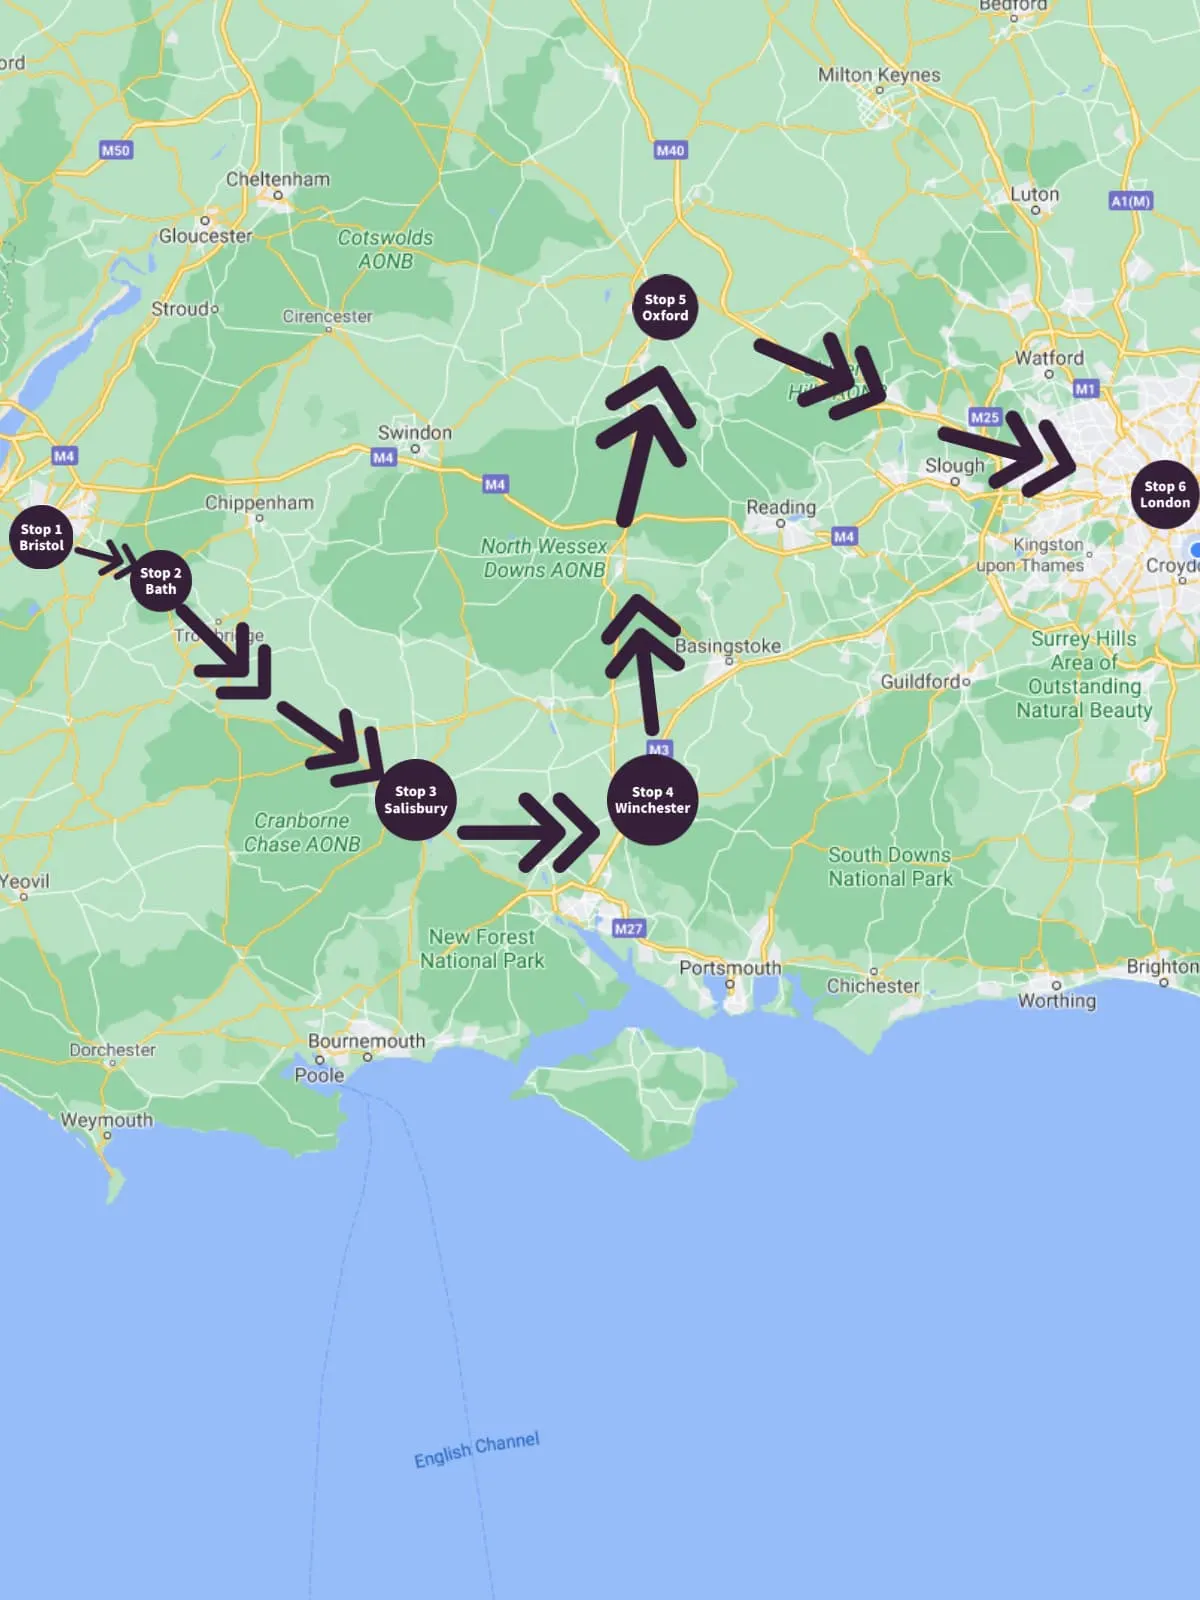 Train maps of the UK Historical Cities route. 